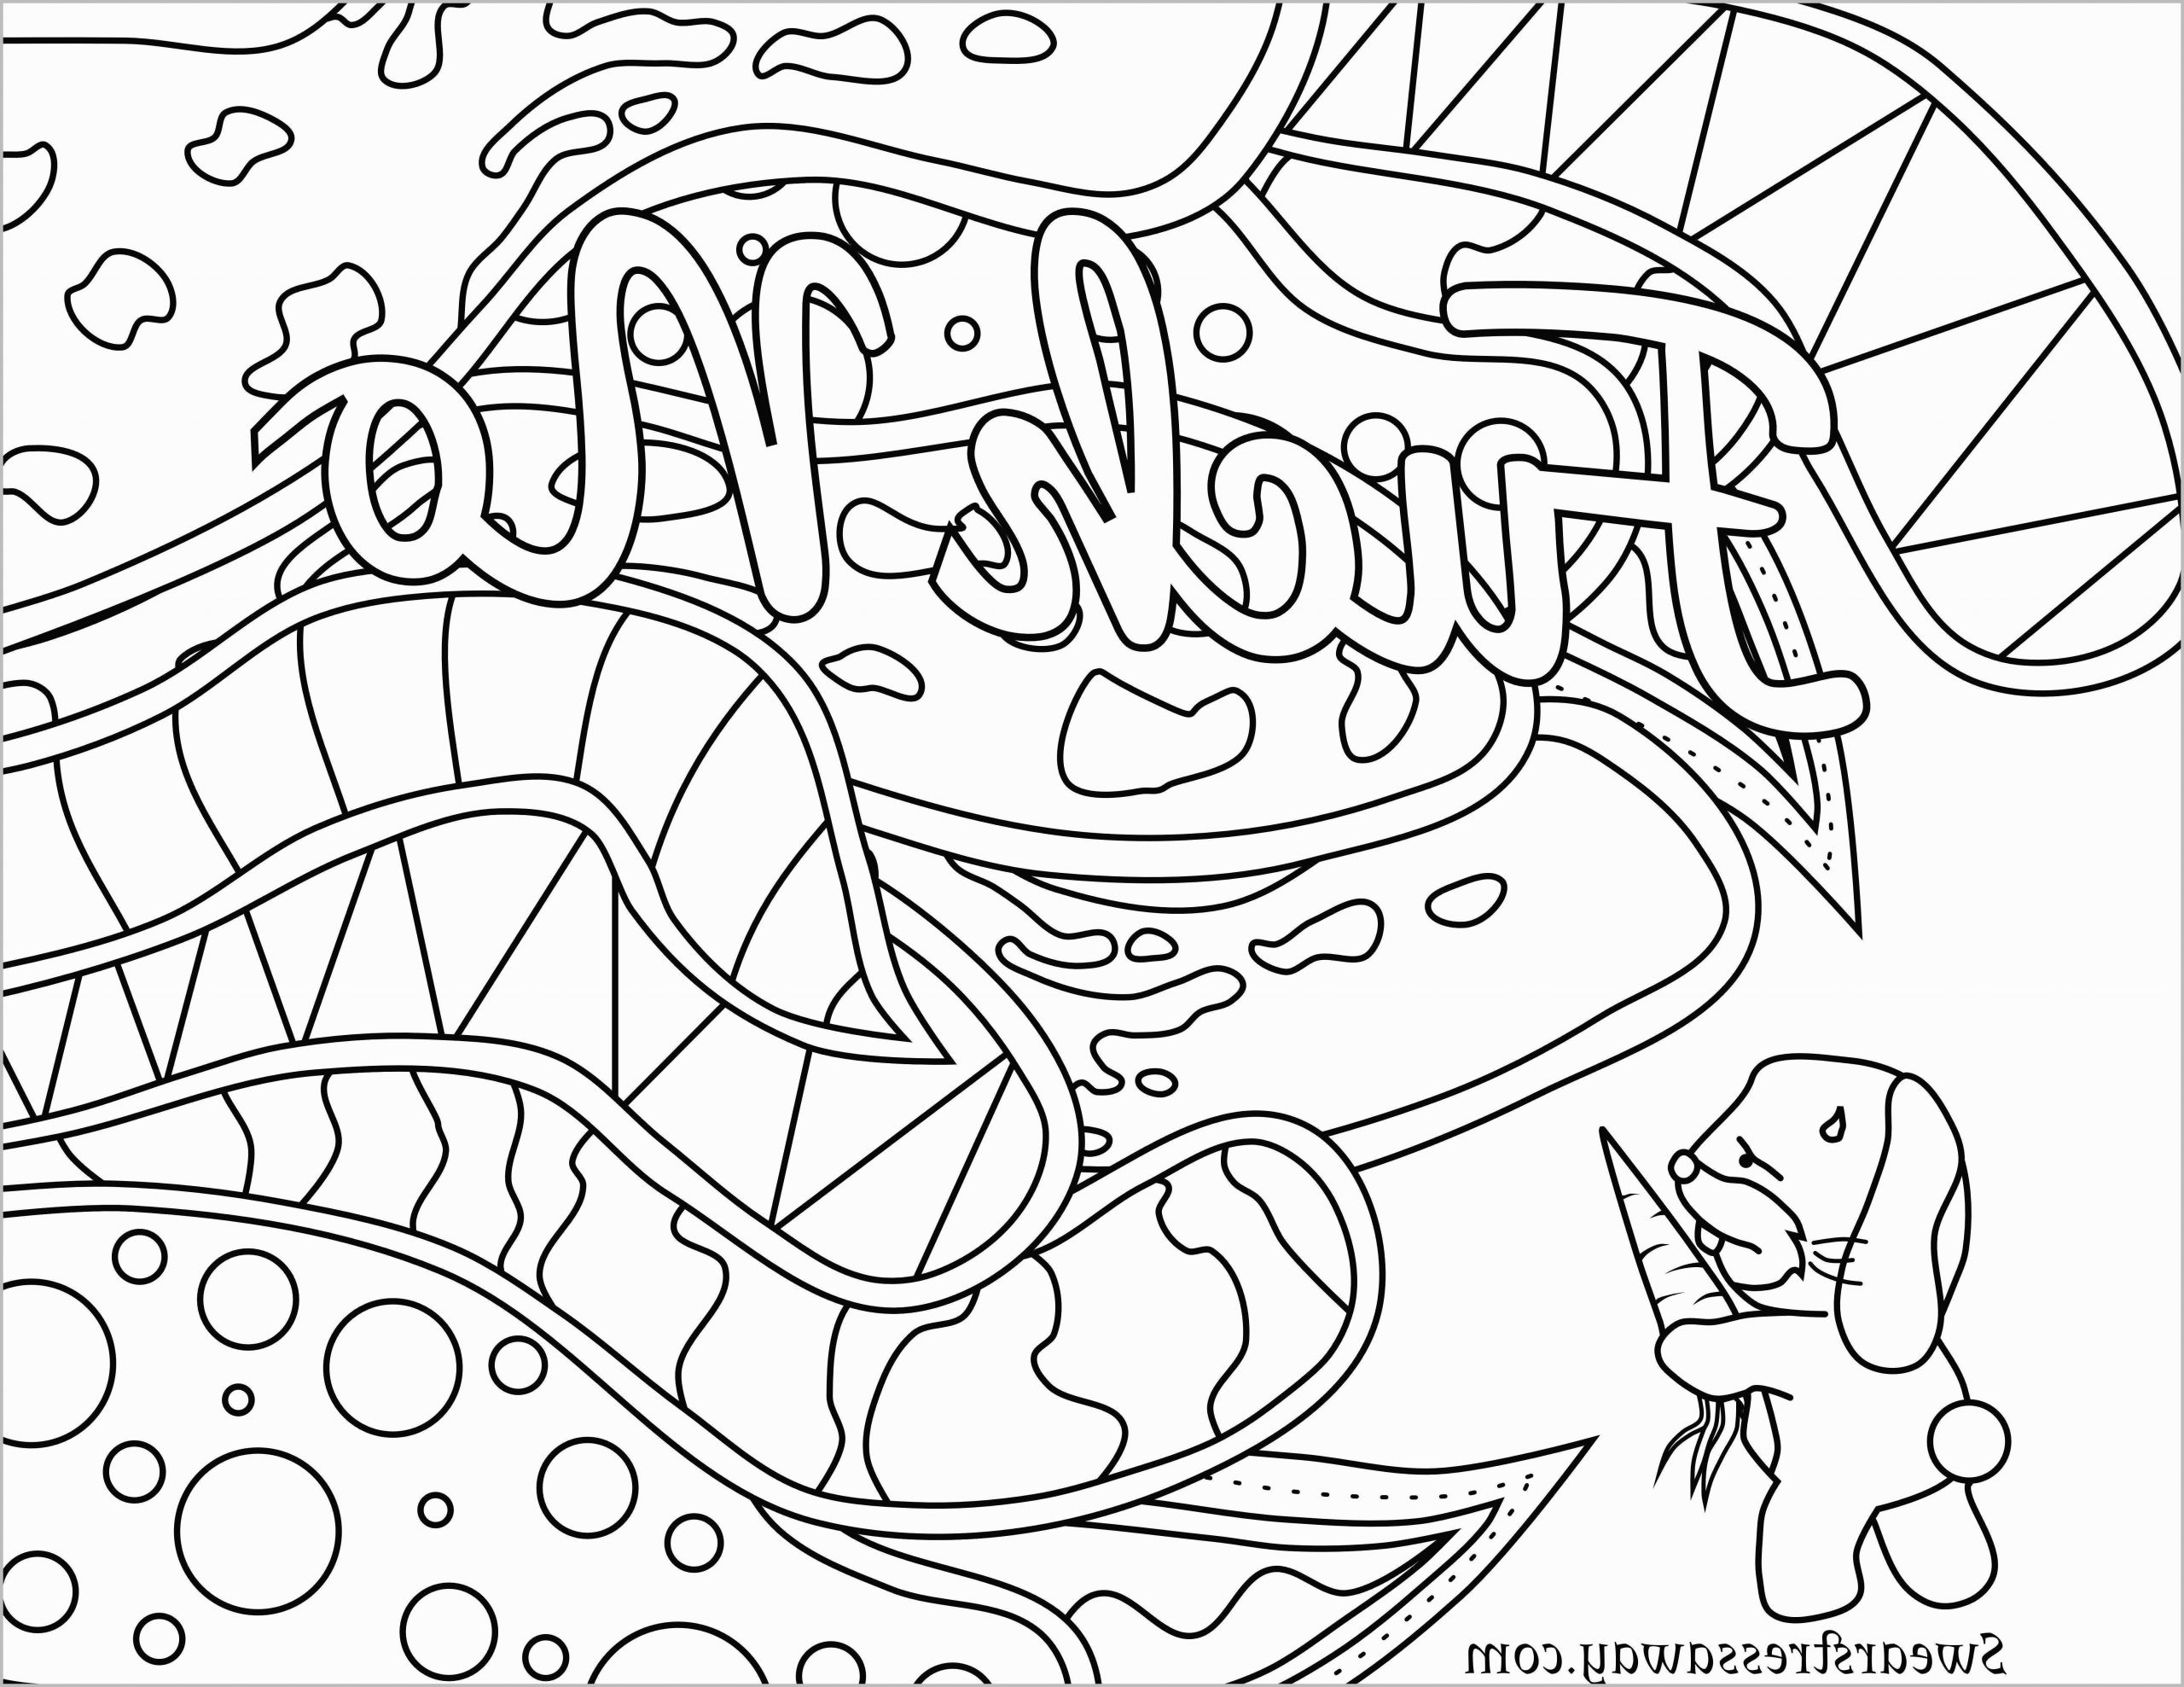 coloring pages : Swear Word Coloring Pages For Adults Best Of 25 Beautiful  Cuss Words Coloring Page Swear Word Coloring Pages for Adults ~  affiliateprogrambook.com